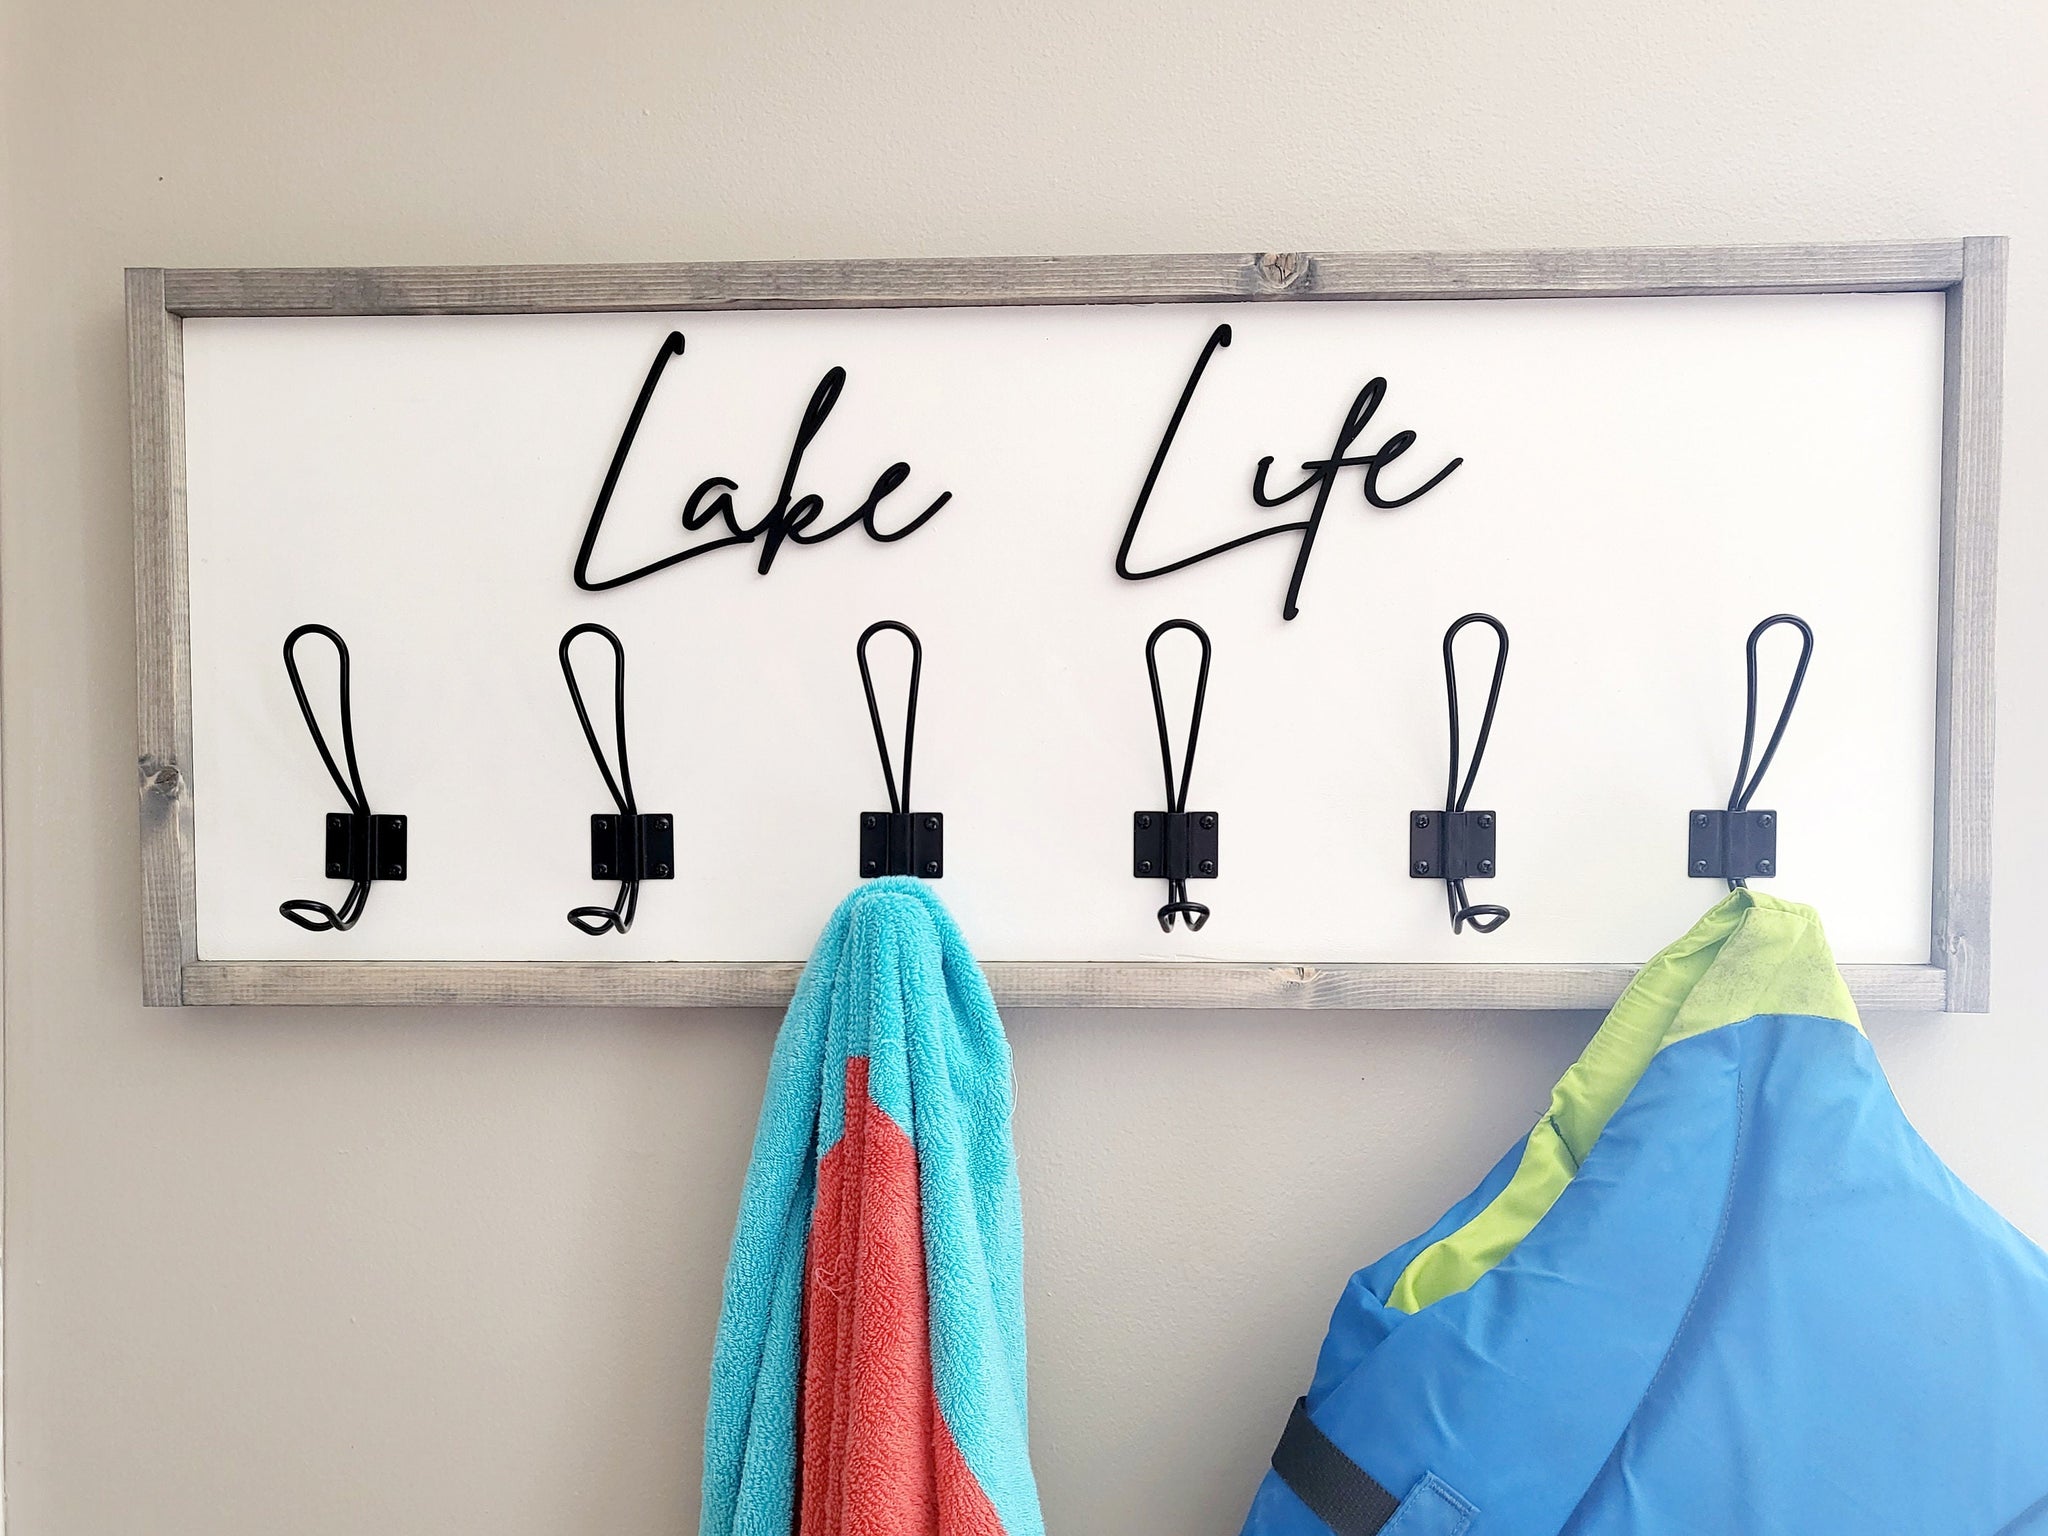 3D Lake Life towel hooks - Cabin Bathroom Decor - Welcome to the